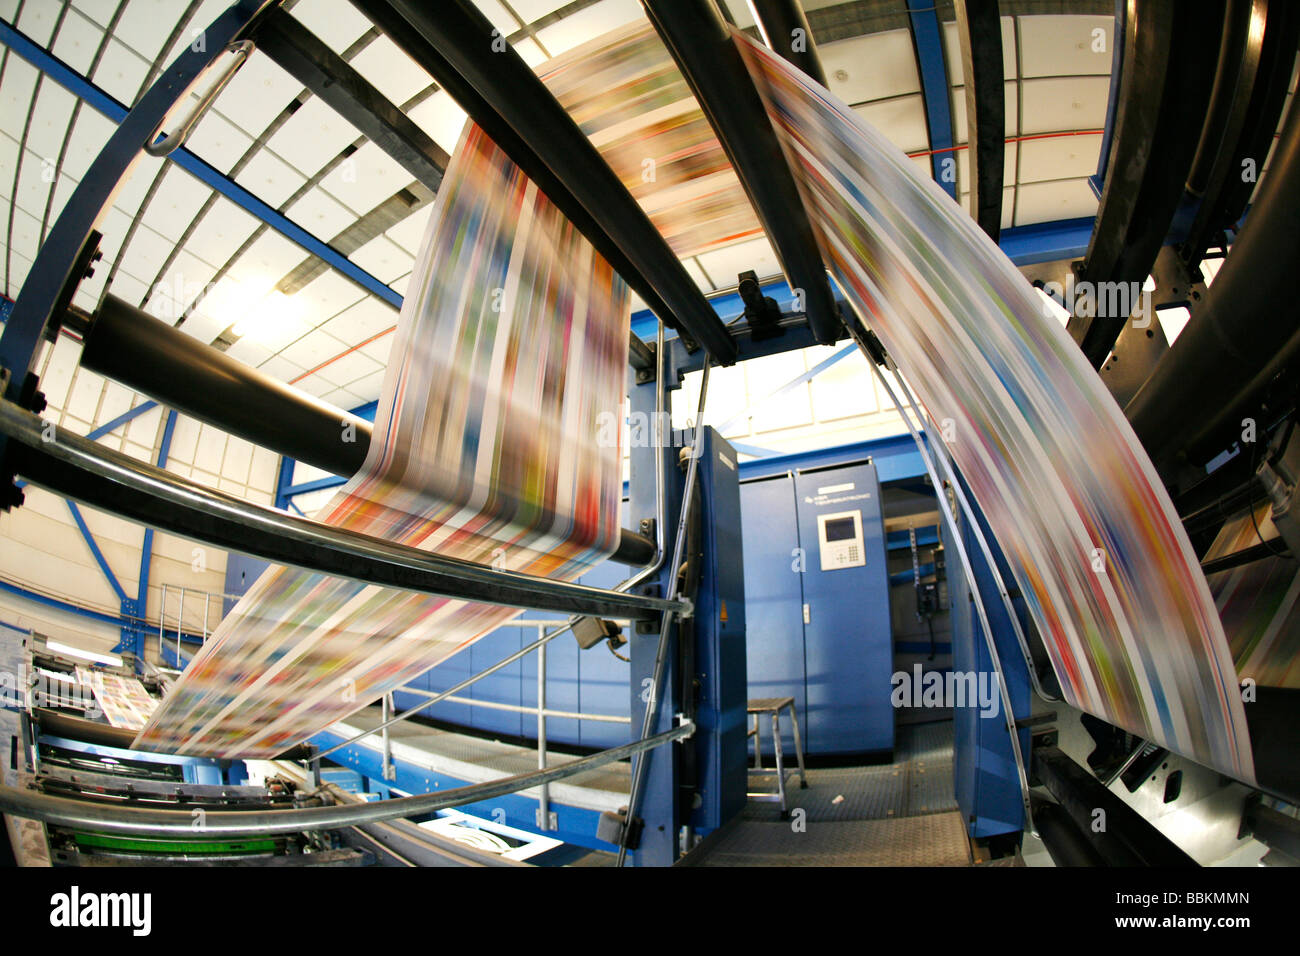 Dijkman Offset printing This company prints the financieel dagblad Dutch financial times kidsweek and other media Stock Photo